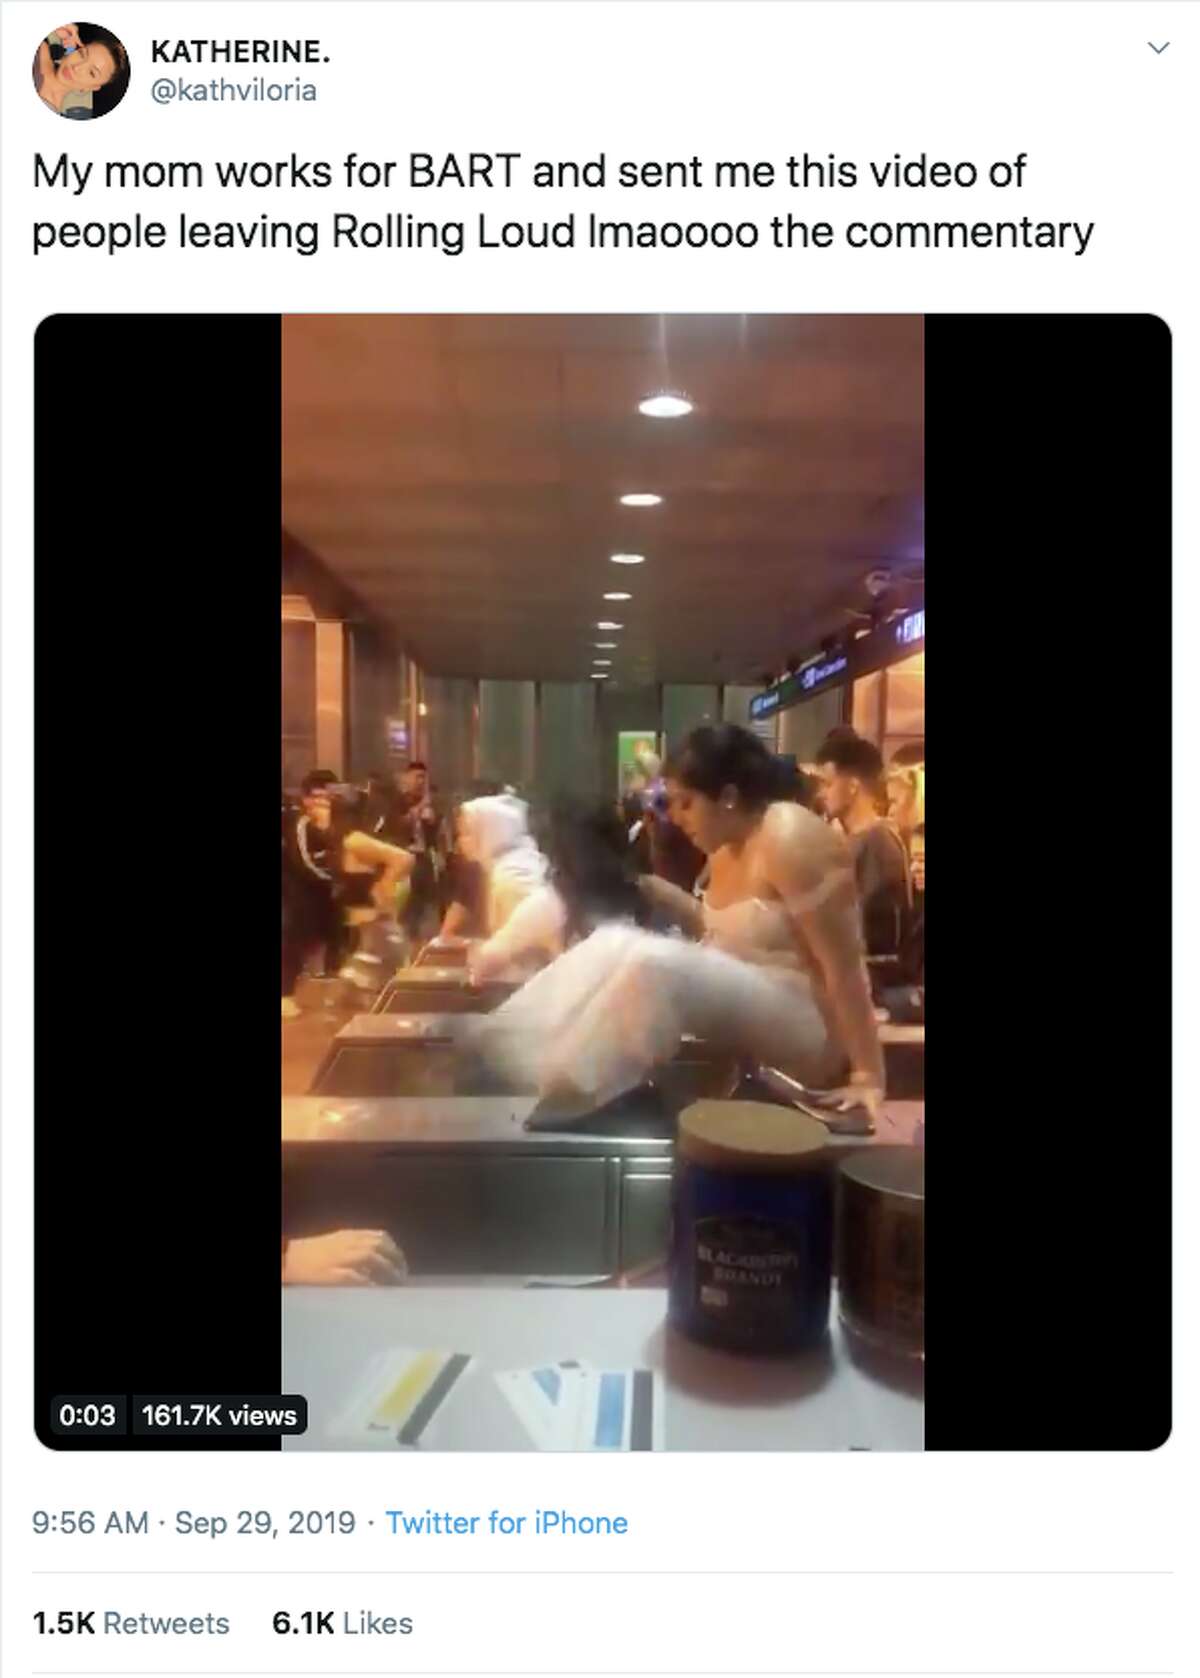 Twitter user @kathviloria shared a video showing people evading BART fares after the Rolling Loud concert on Sept. 29. 2019.